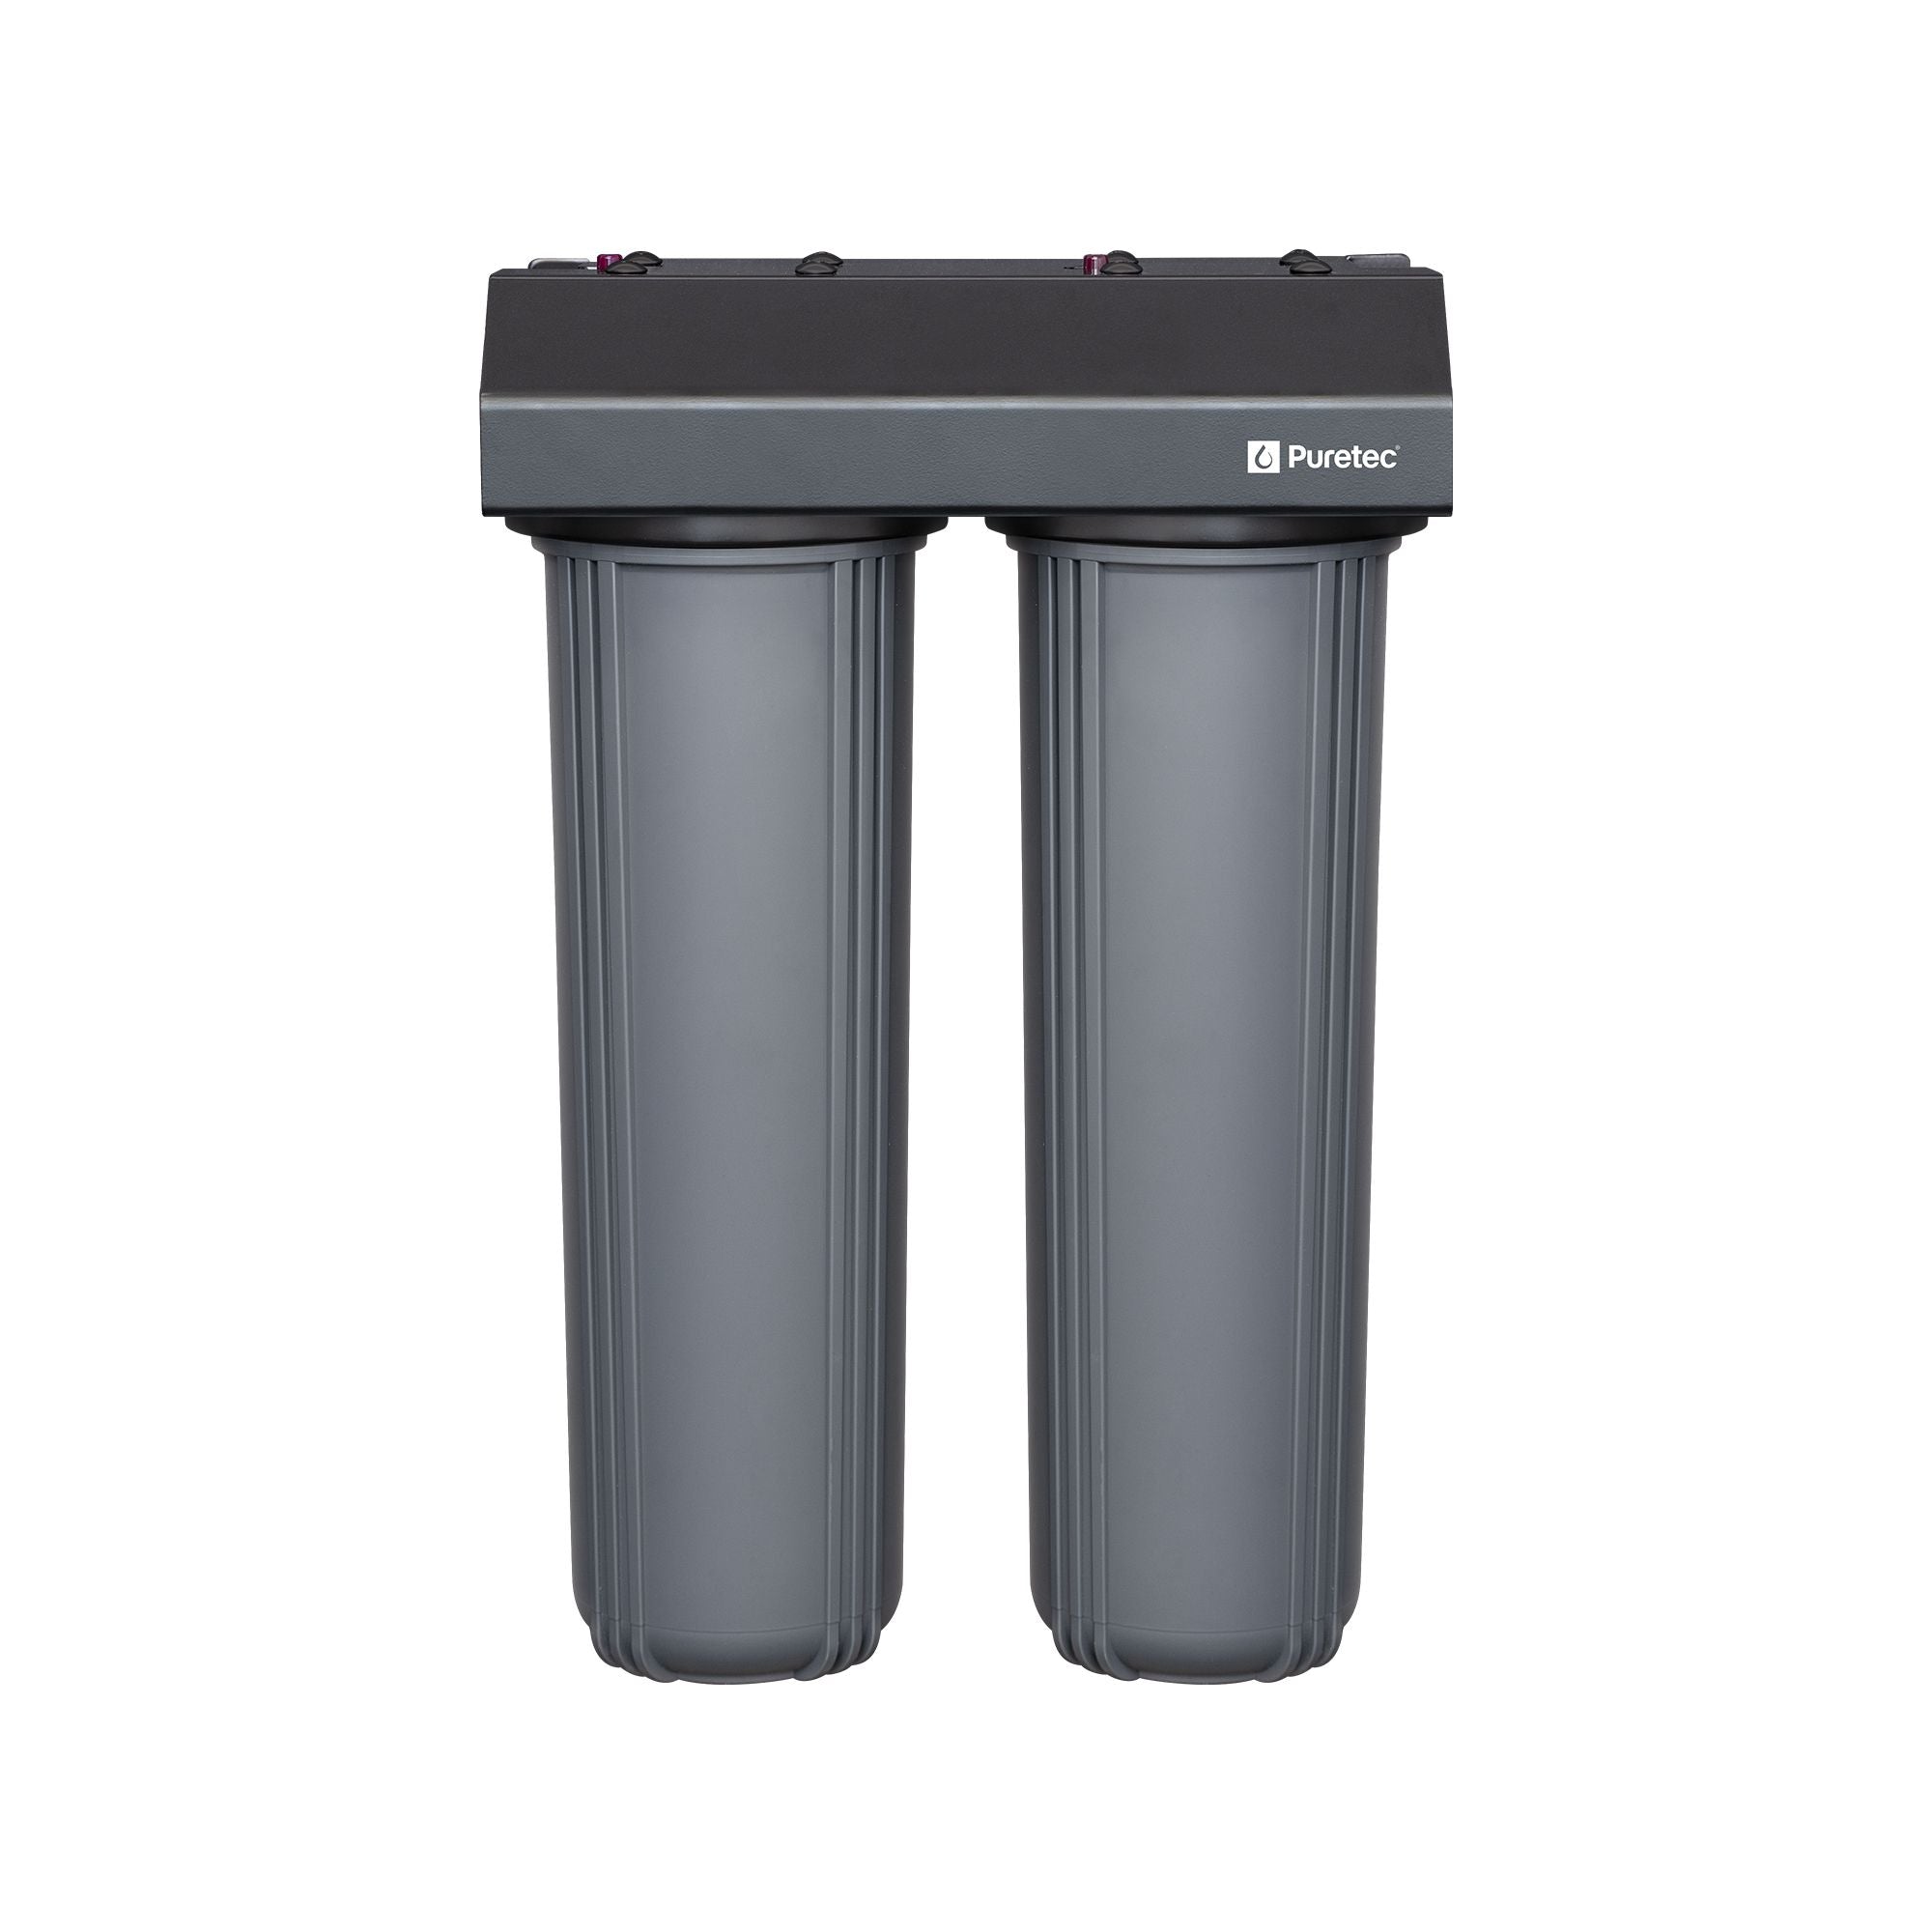 Puretec WH2-55 whole house water filter